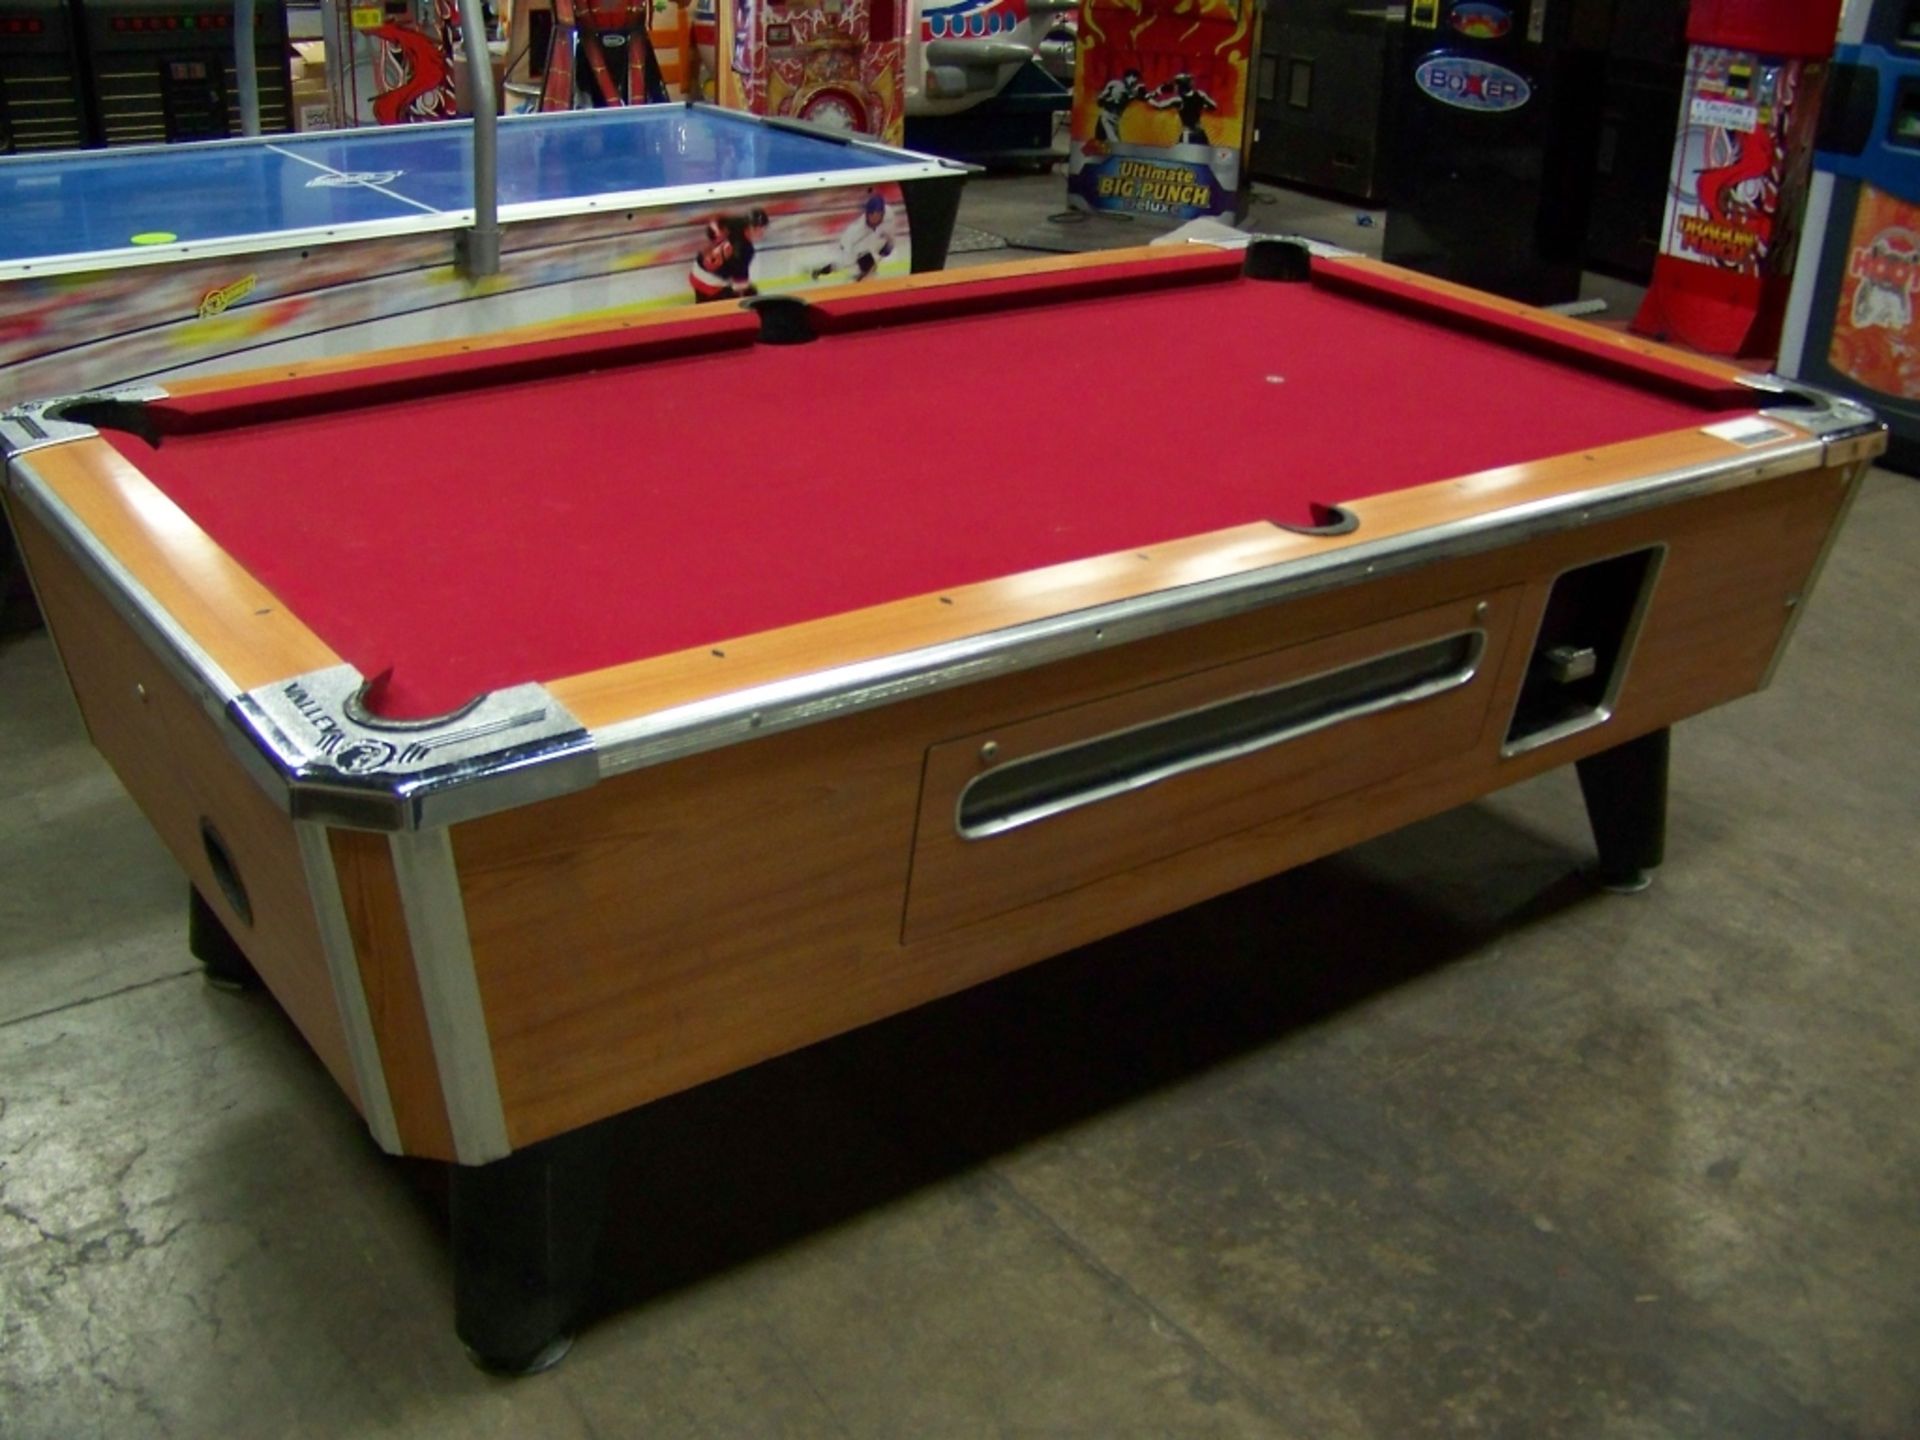 POOL TABLE VALLEY COUGAR 7' SLATE TOP COIN OP